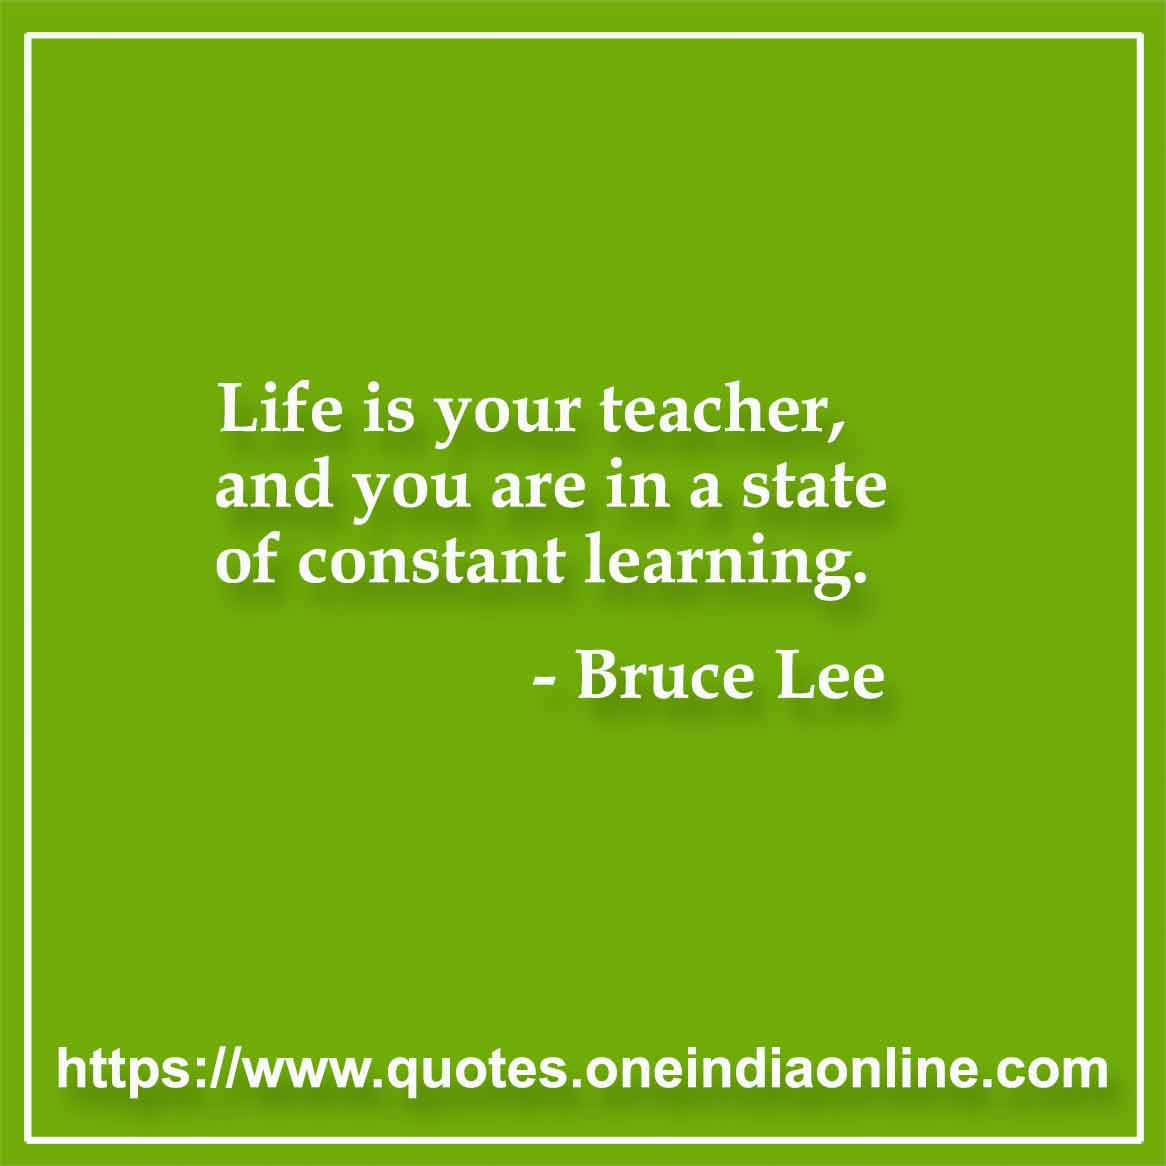 Life is your teacher, and you are in a state of constant learning.